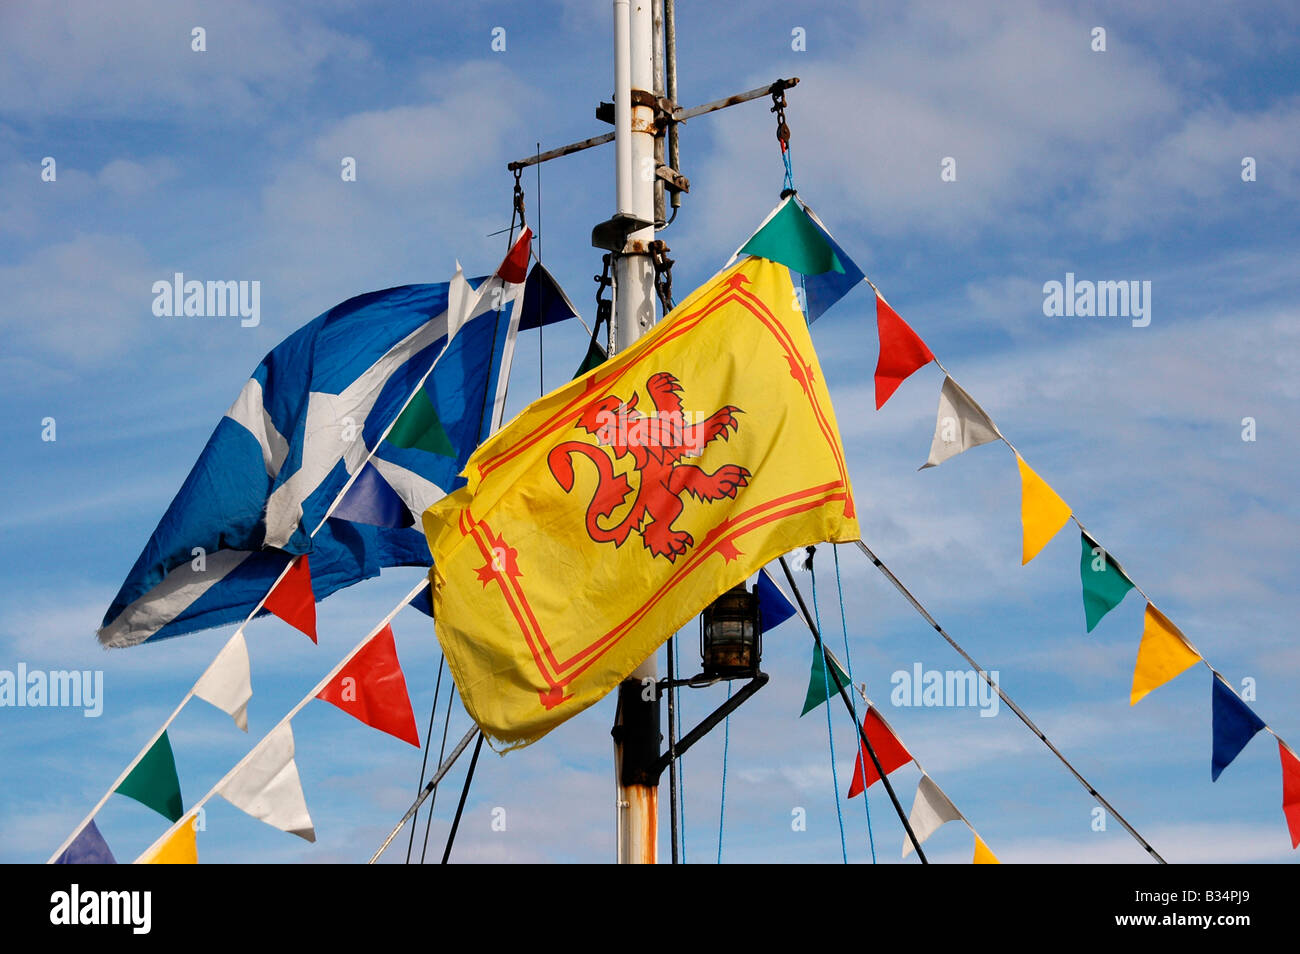 The lion rampart and Saltire flag - Scottish - blow in the wind from a mast of a boat. Stock Photo